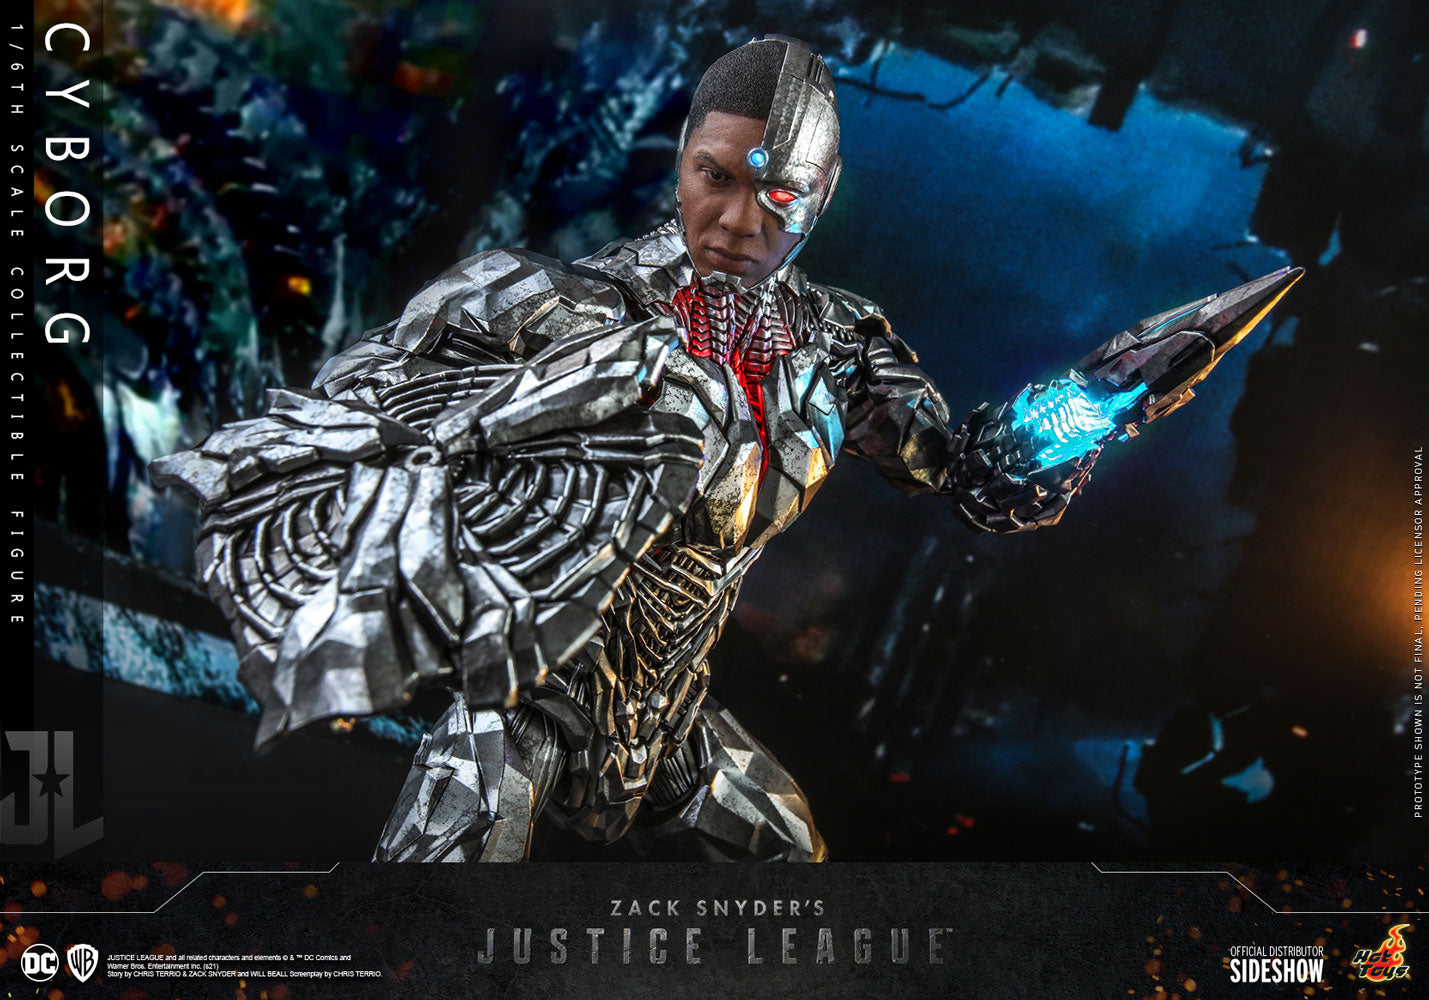 Hot Toys Zack Snyders Justice League Cyborg